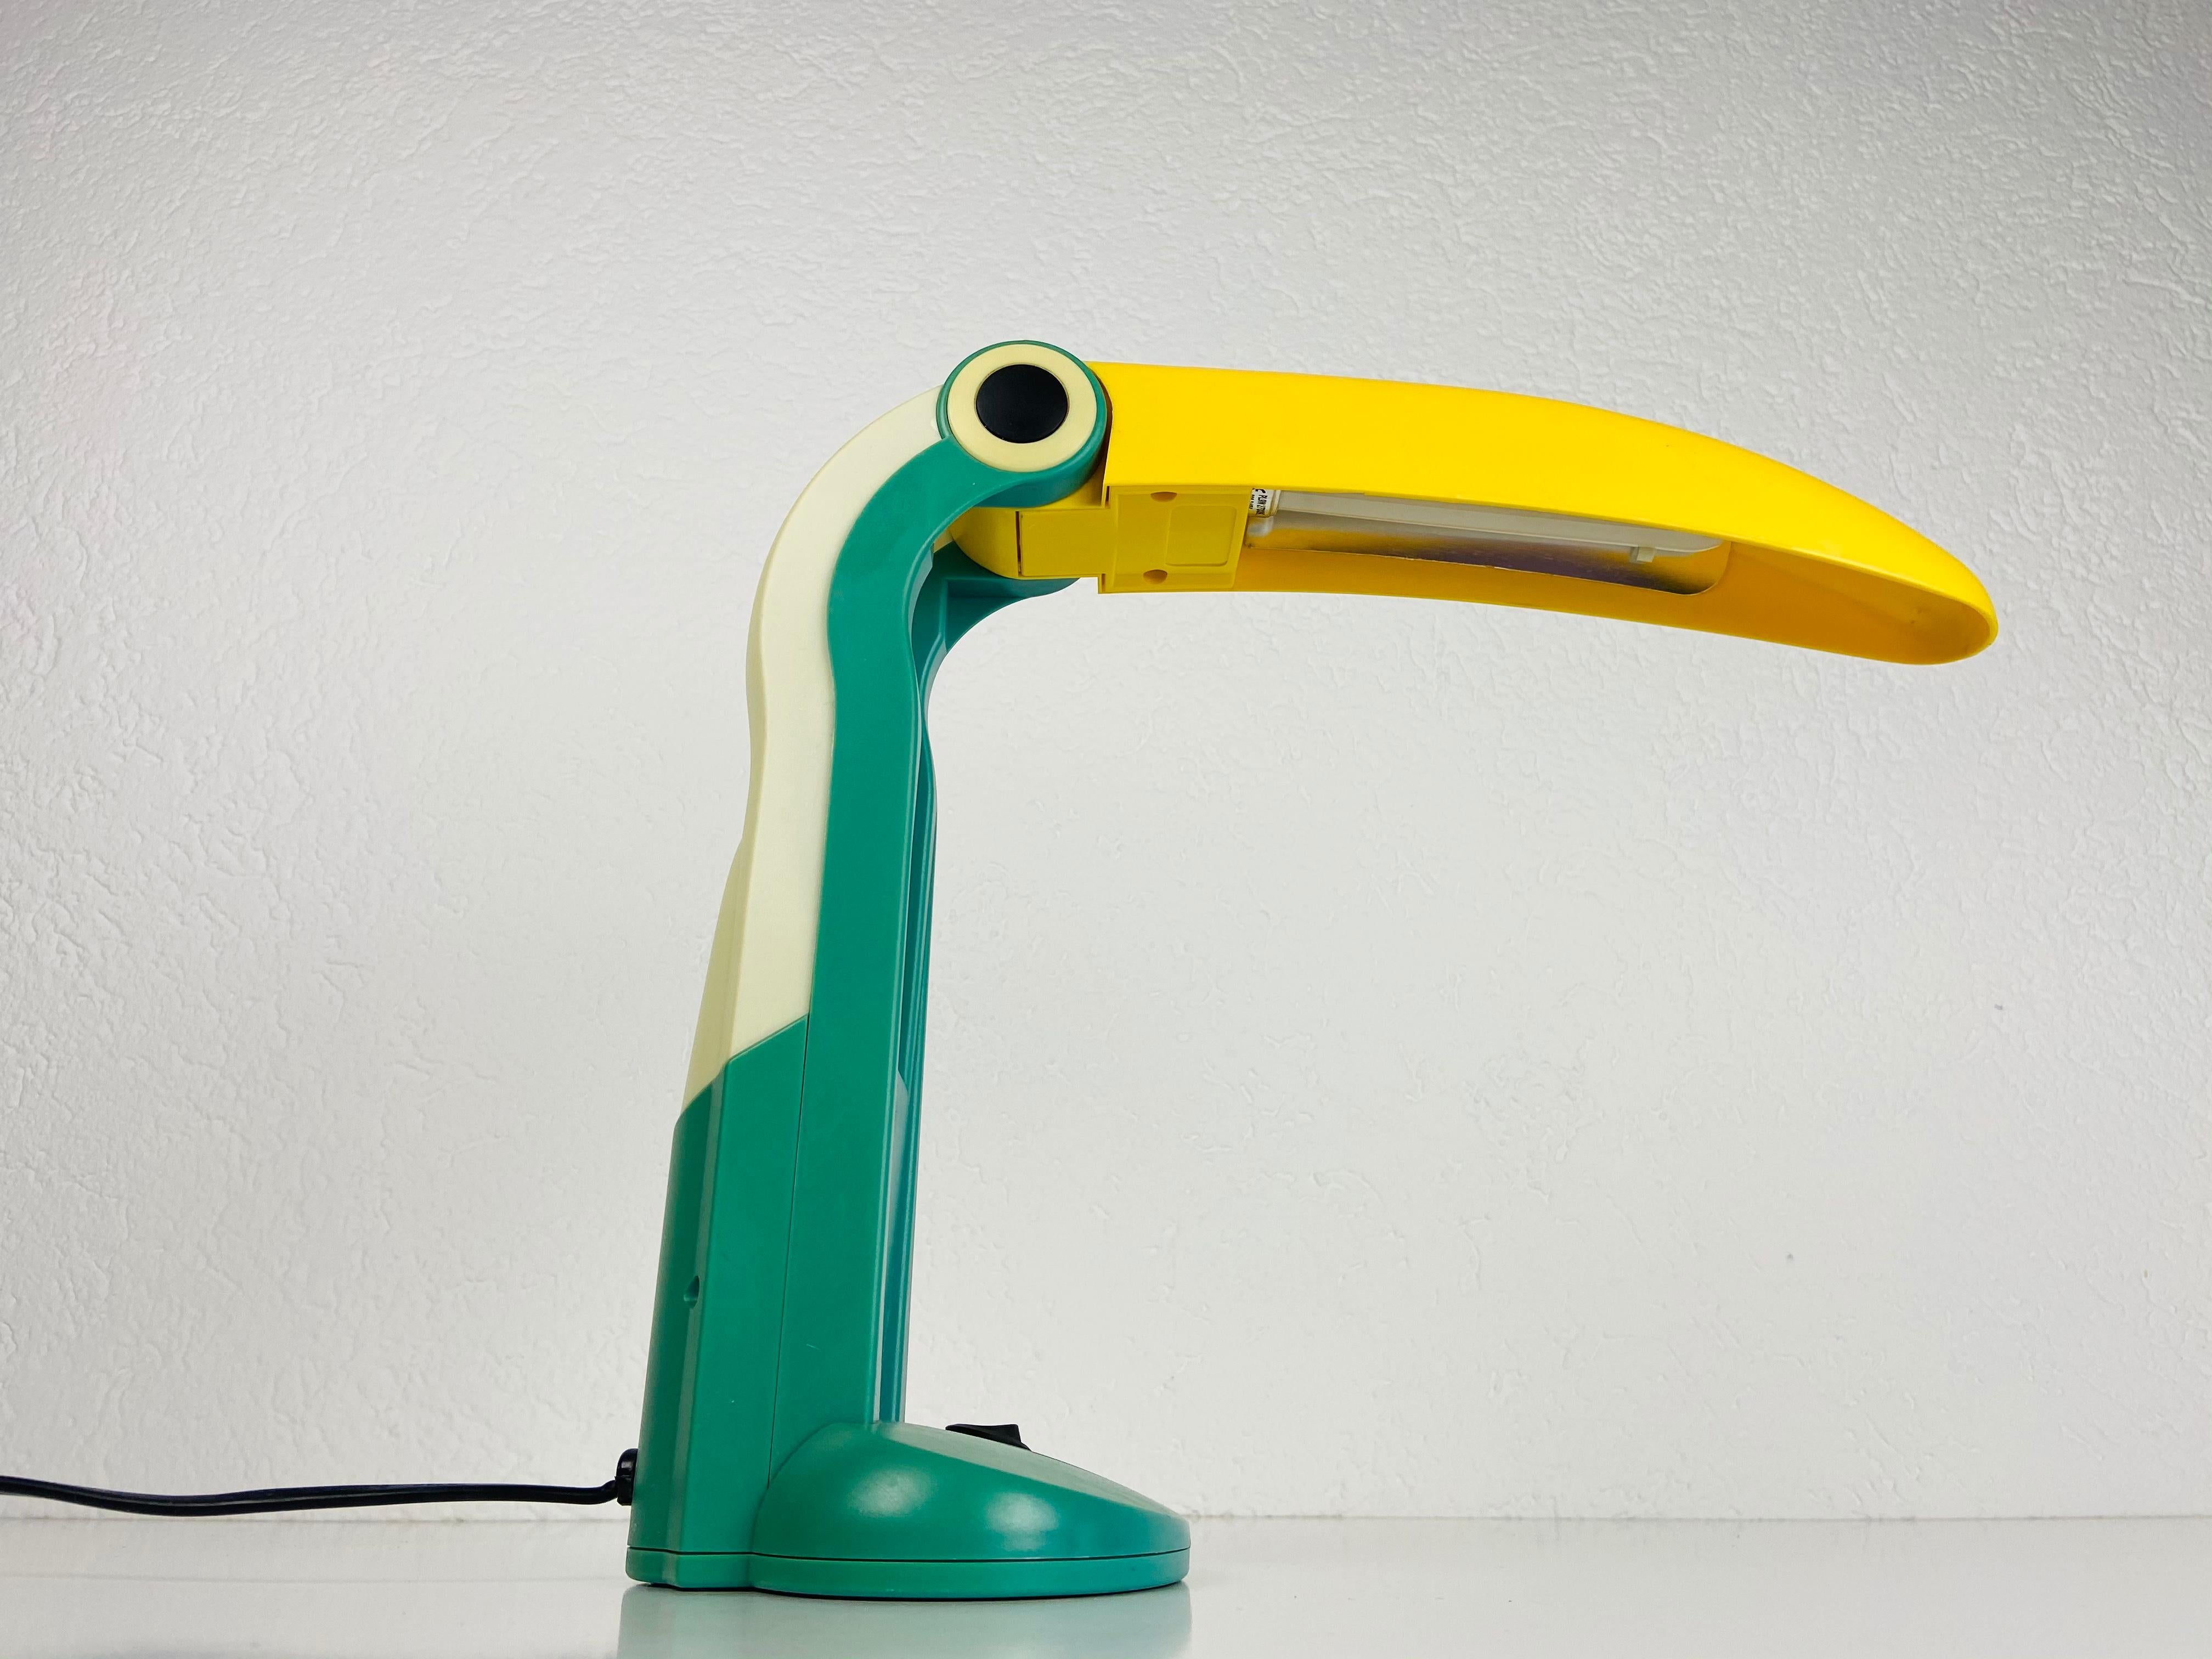 A beautiful table lamp designed by H.T. Huang for Huangslite in the 1990s. It is fascinating with its beautiful toucan design. The lamp is in a very good vintage condition and works perfectly. The head of the lamp is adjustable.